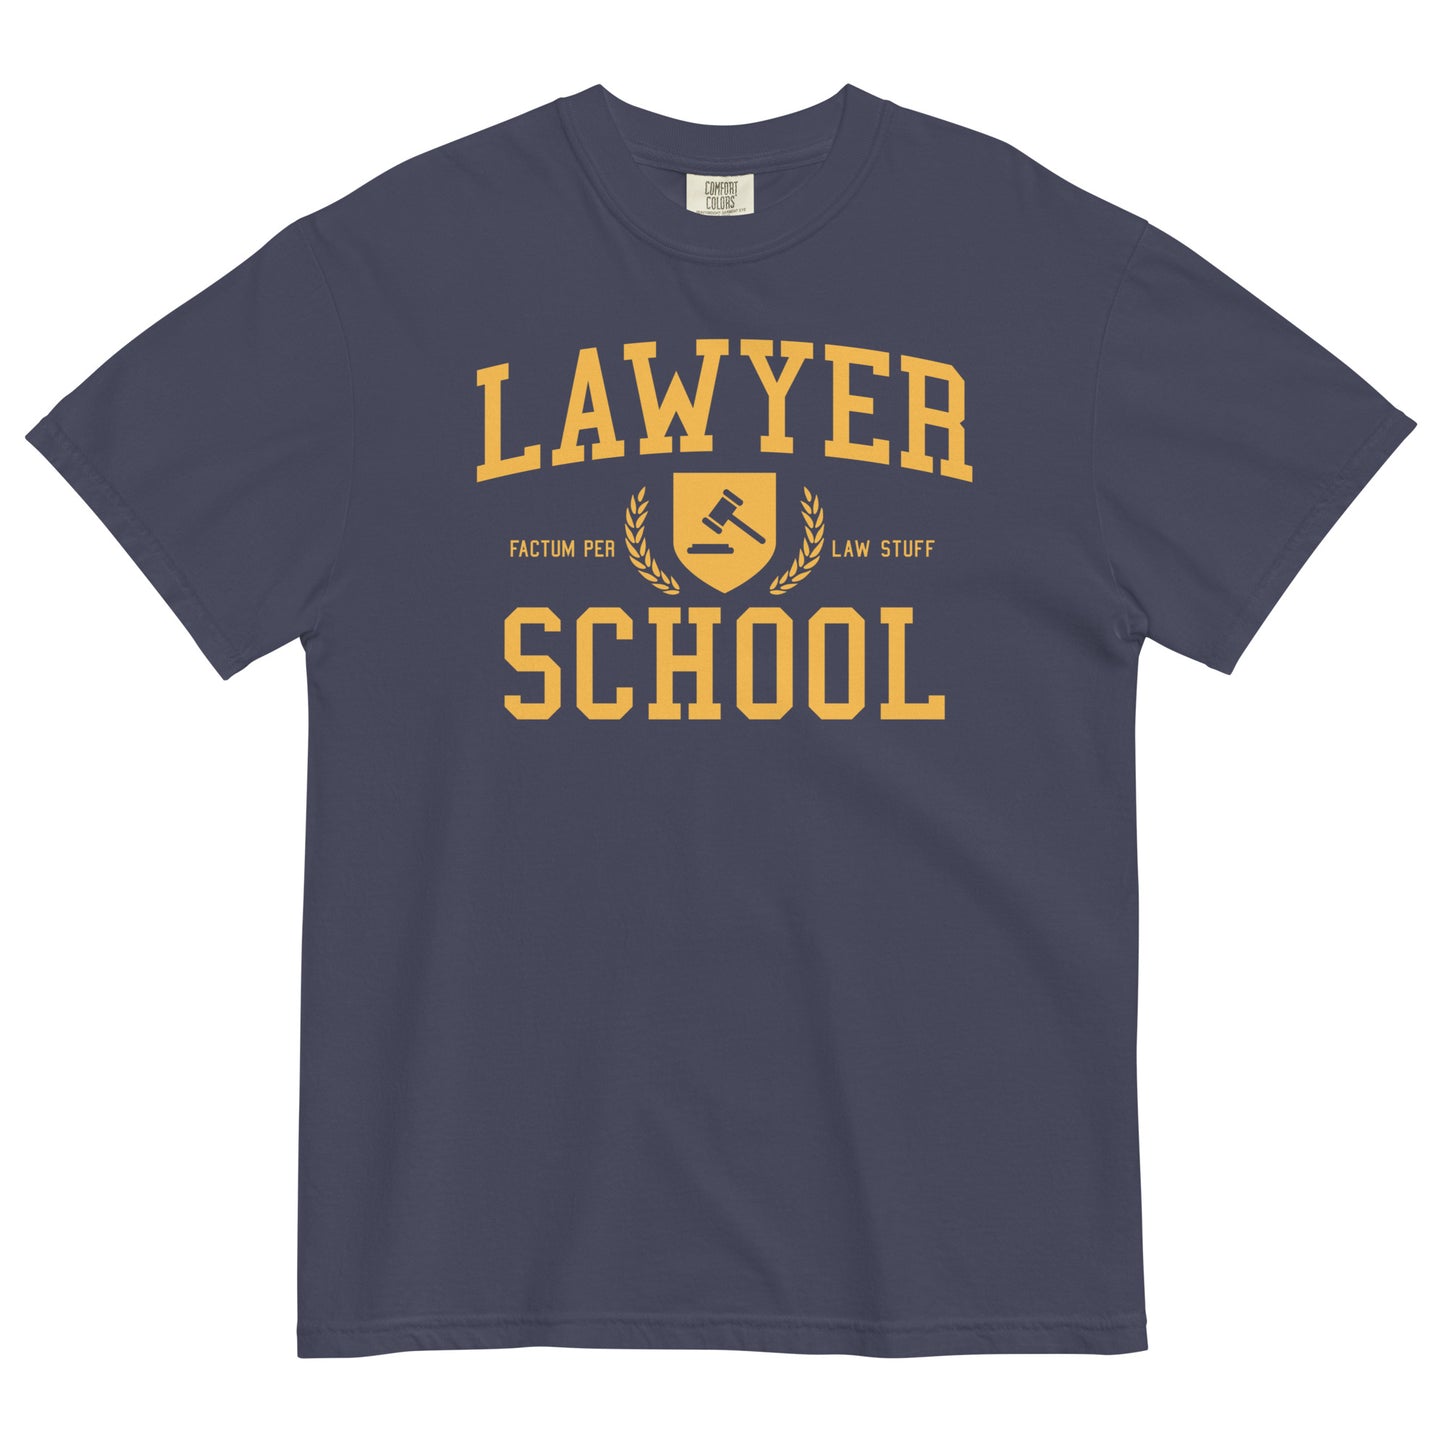 Lawyer School Men's Relaxed Fit Tee